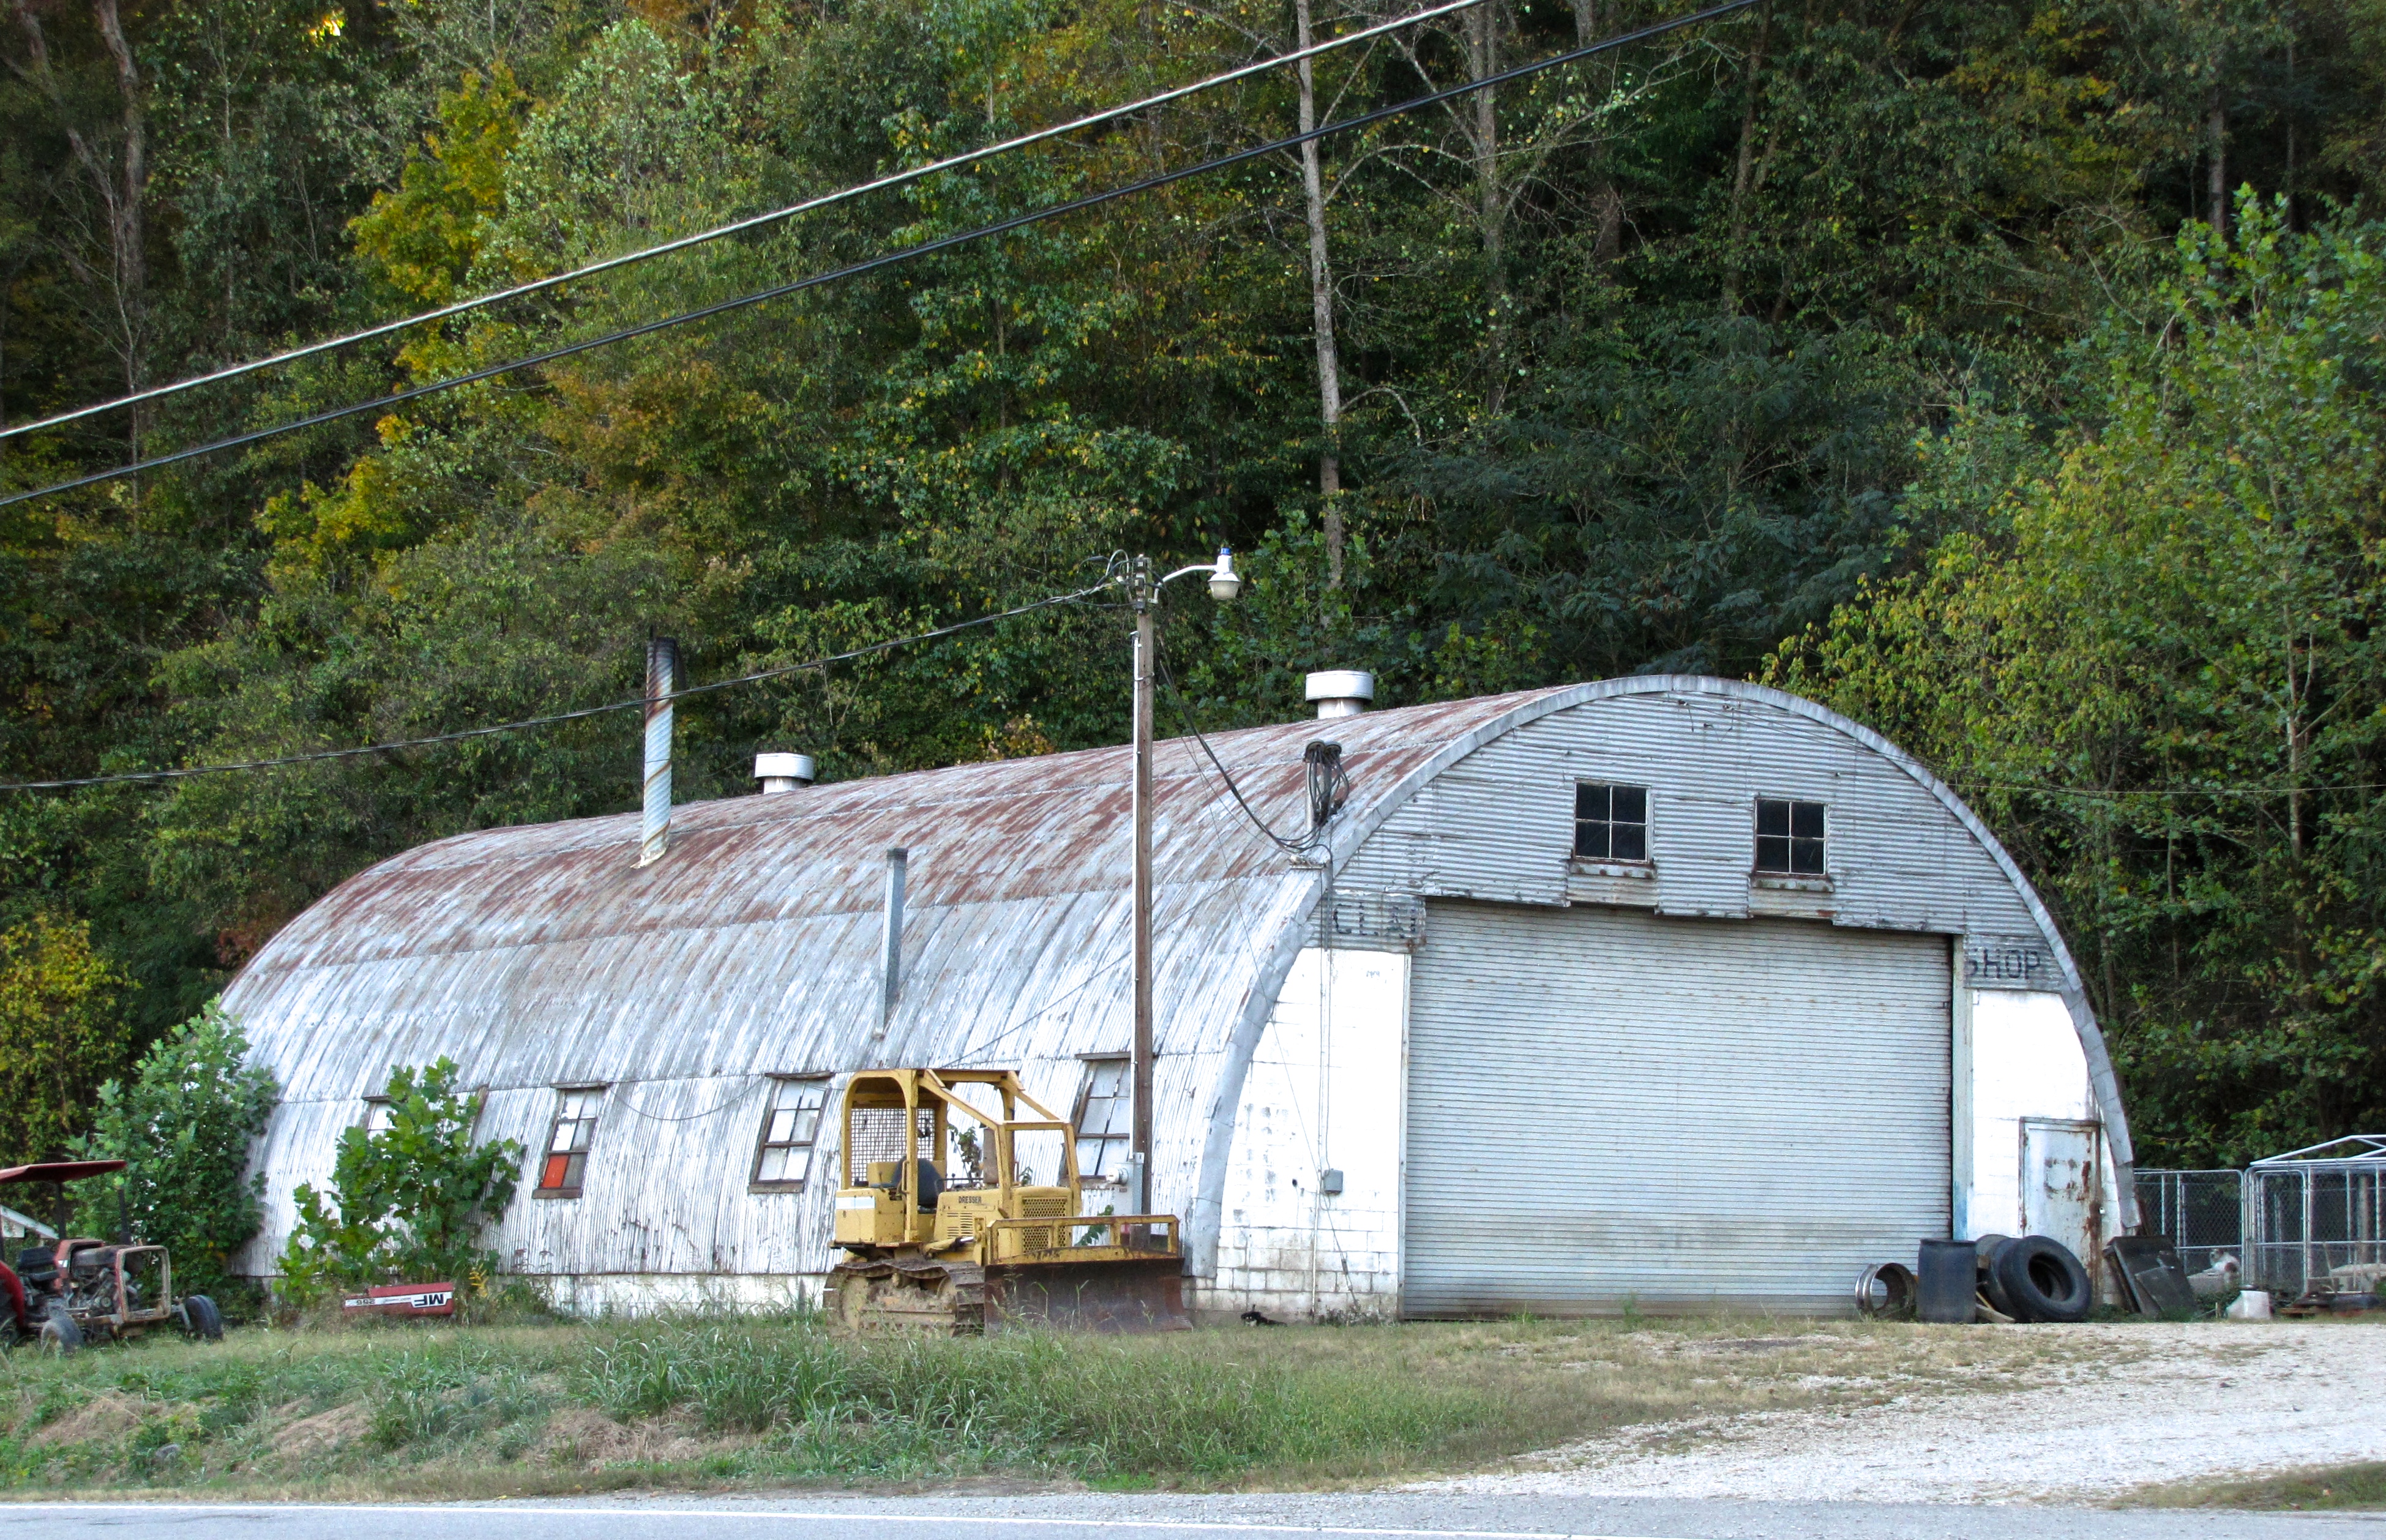 quonset hut in Amesbury, MA